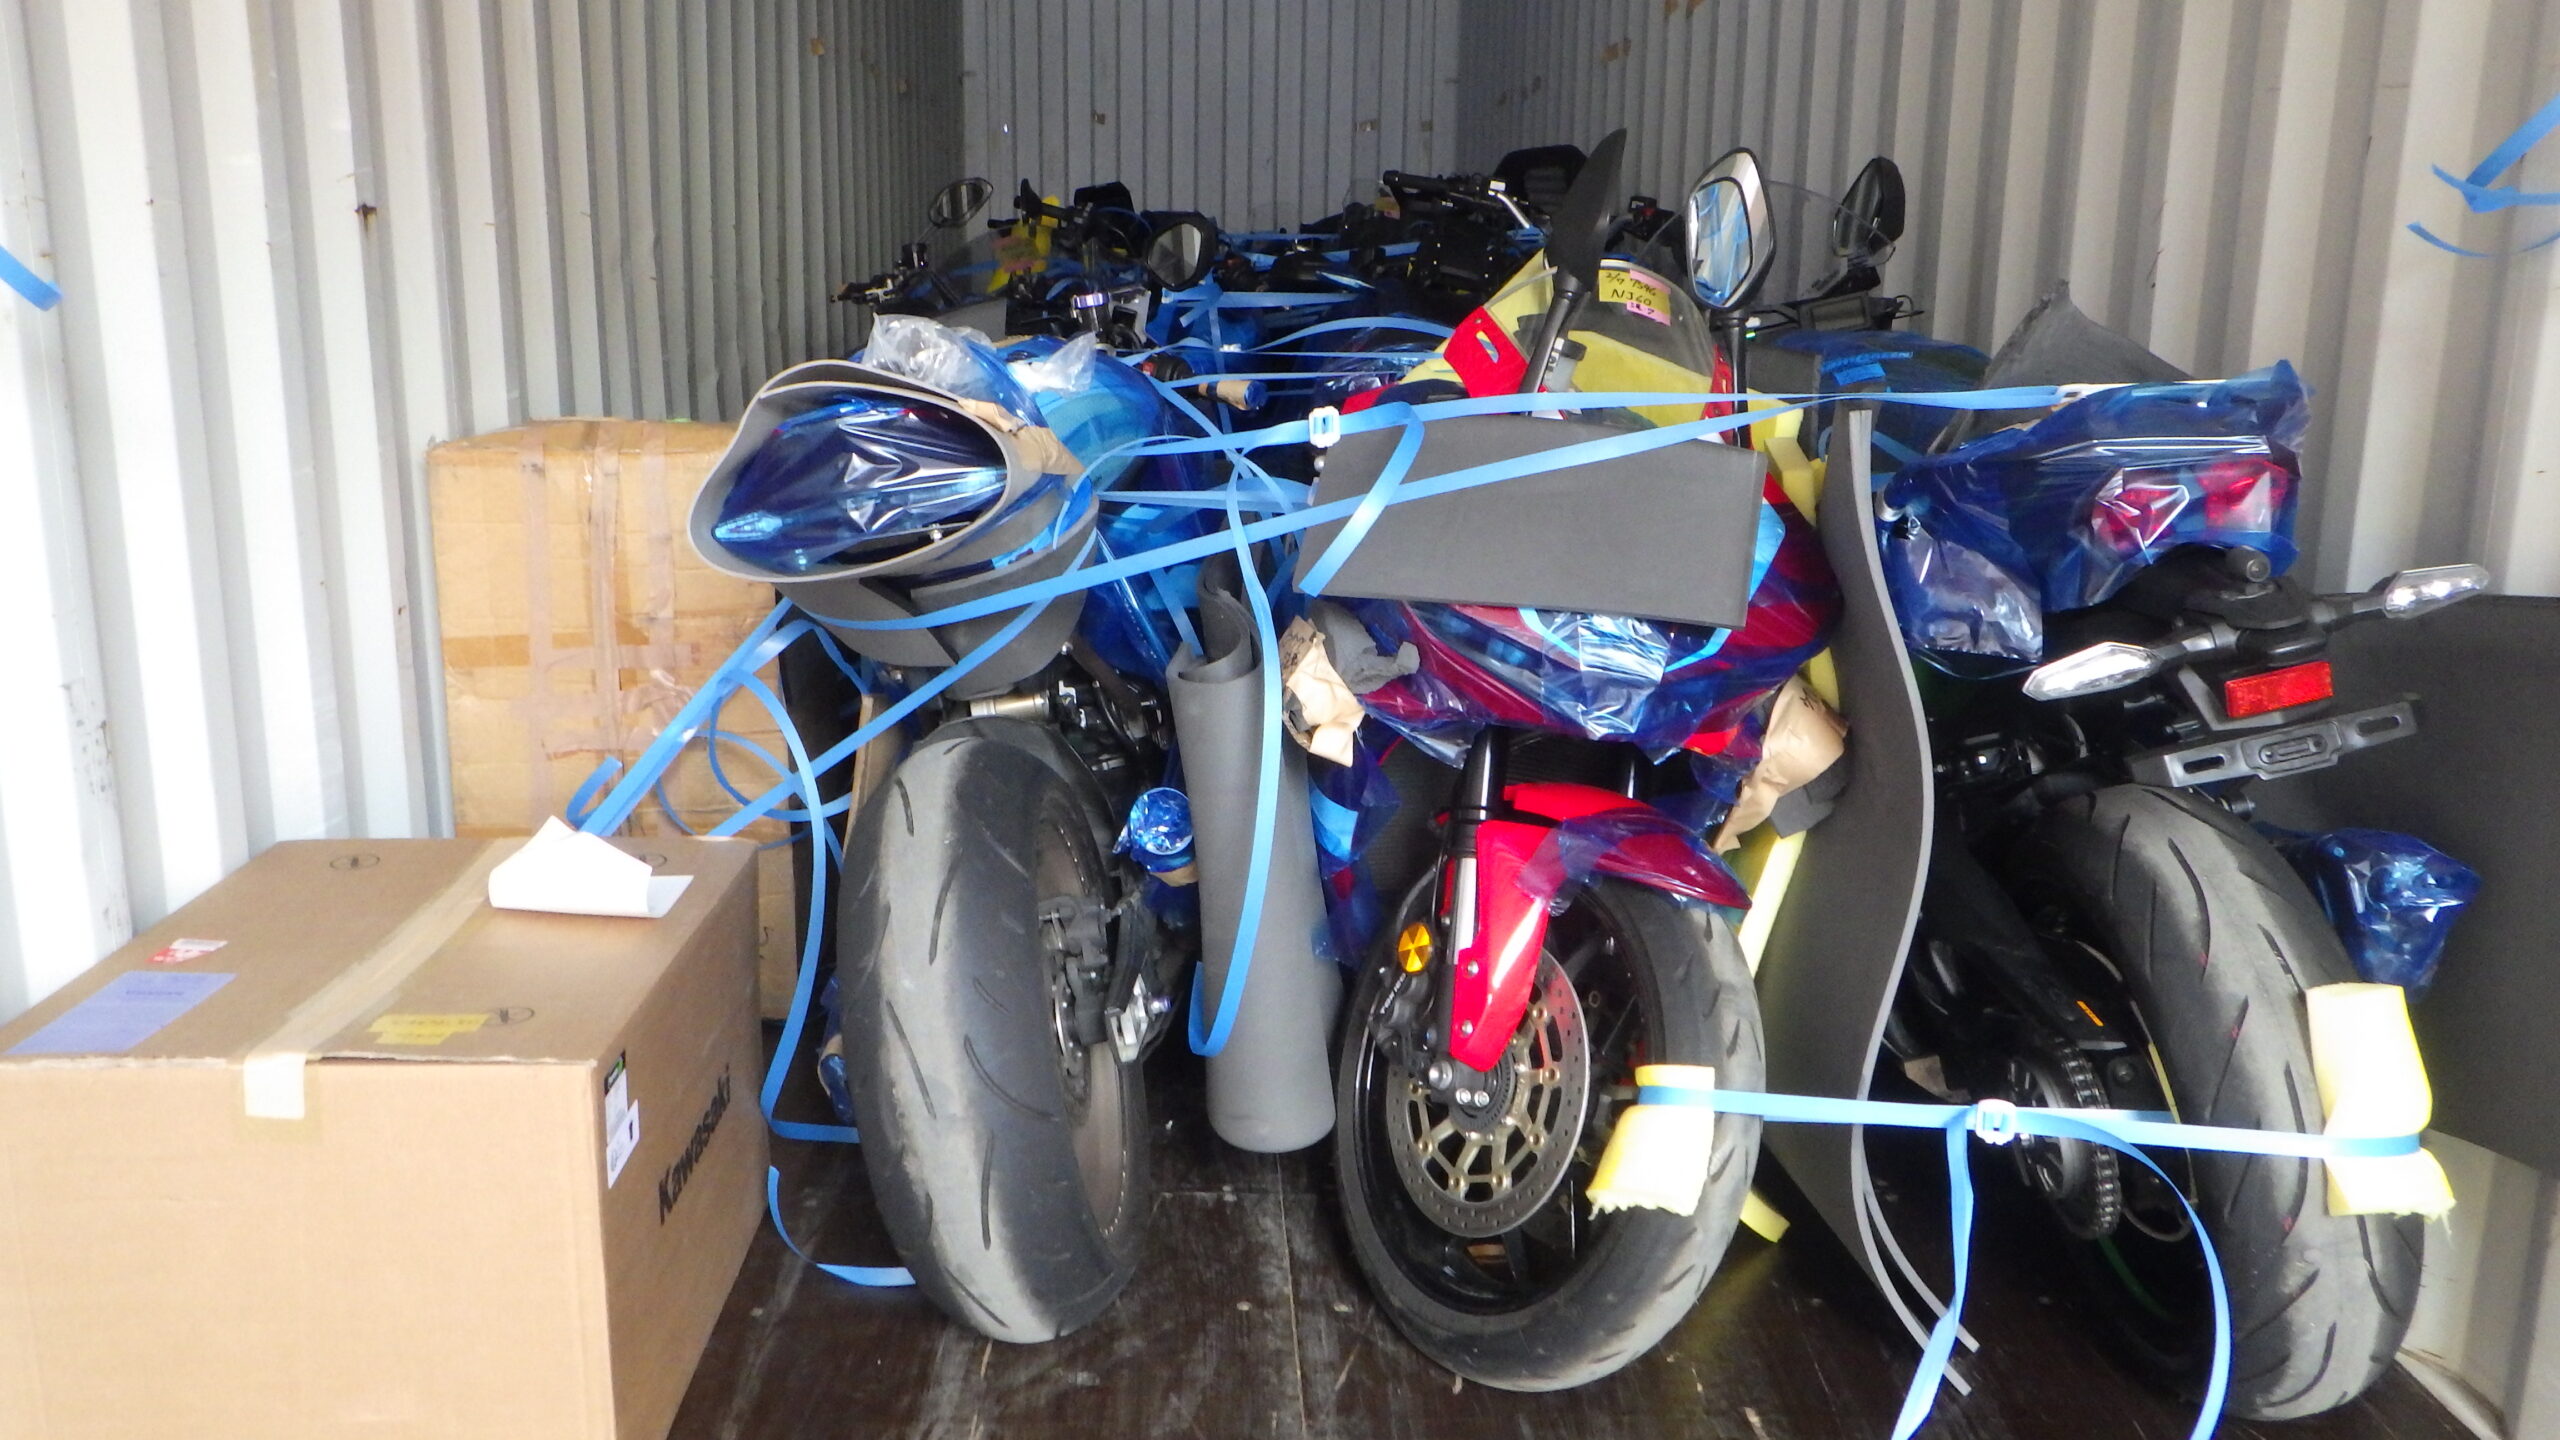 Shipping Example: 40FT Container with 17 Motorcycles!